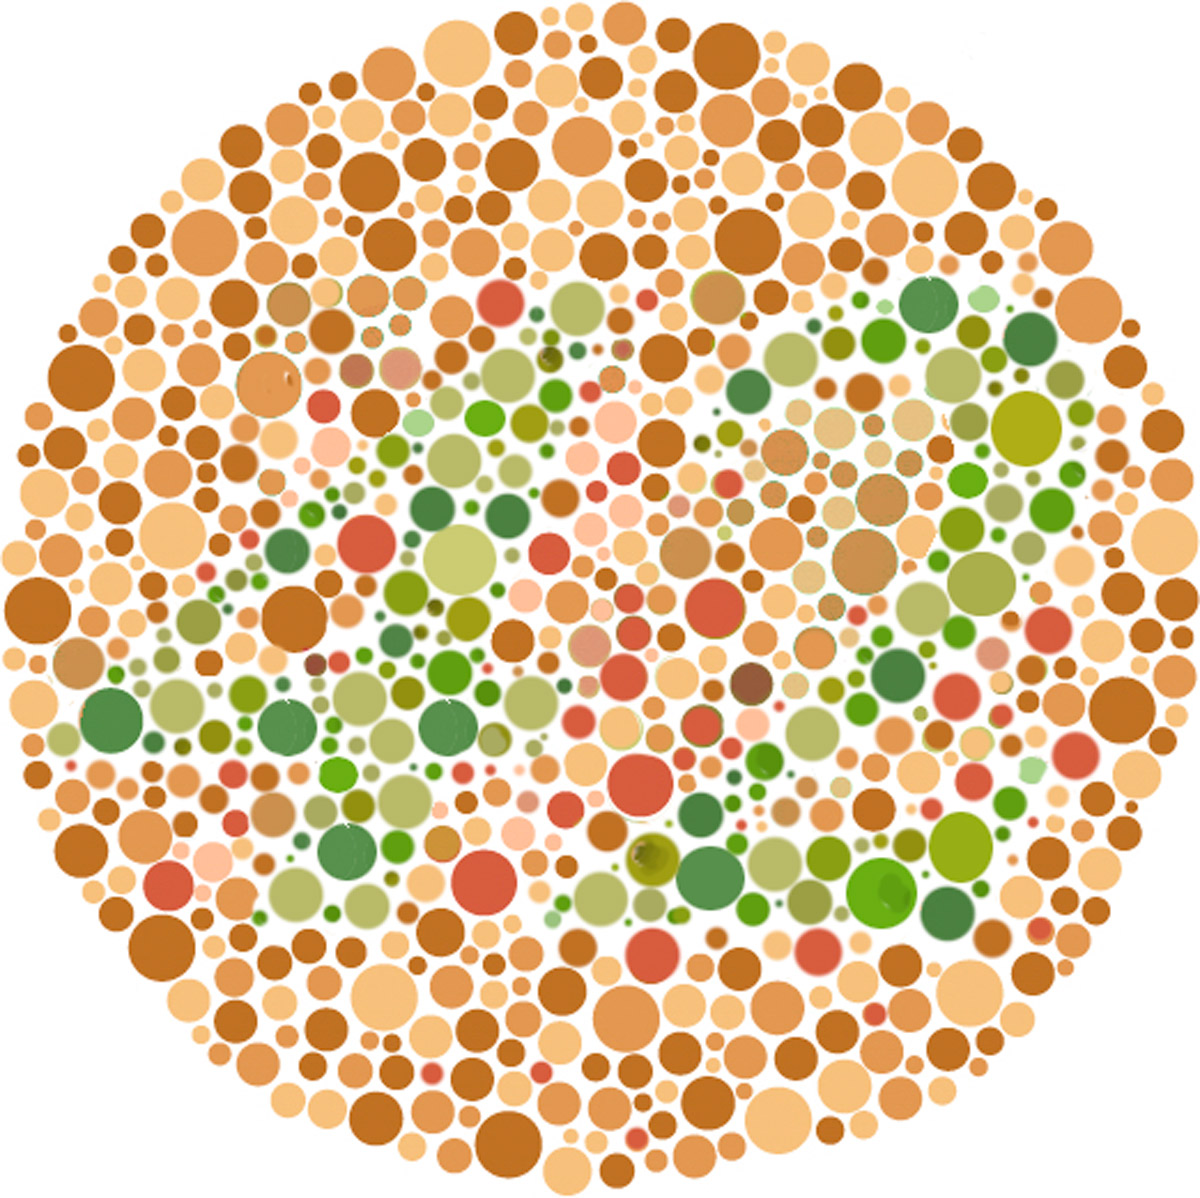 are-you-color-blind-take-this-quiz-to-find-out-heywise